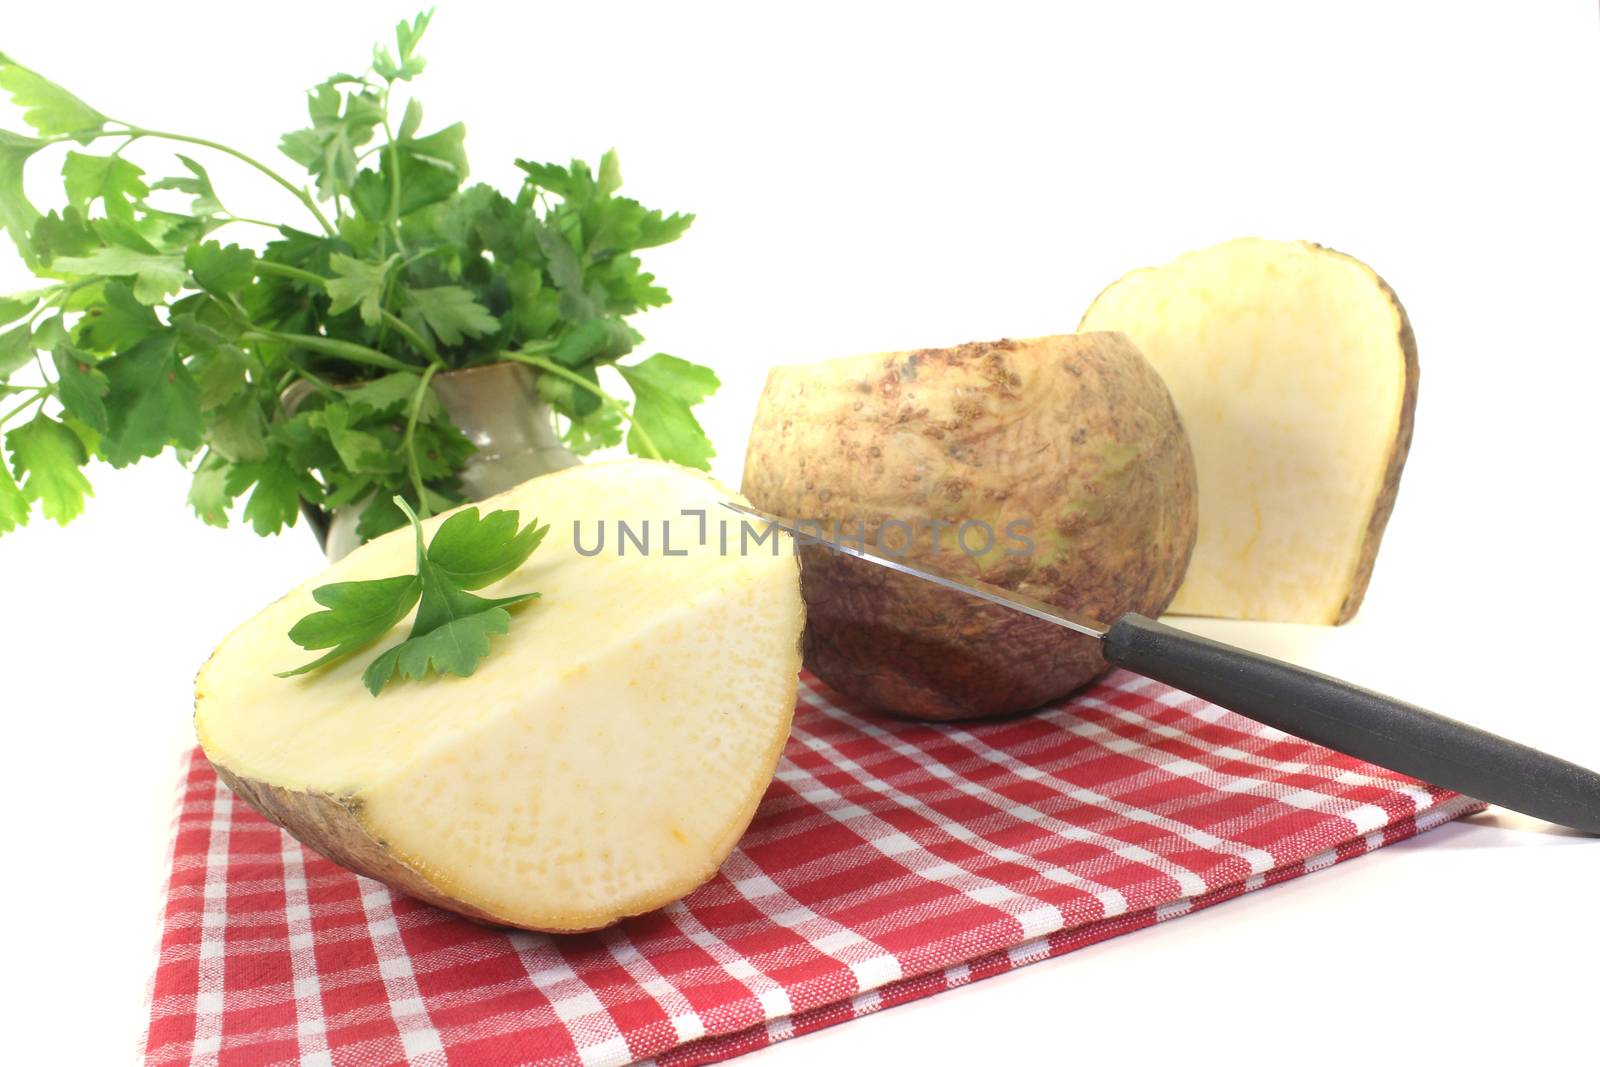 yellow rutabaga with parsley and napkin on a bright background